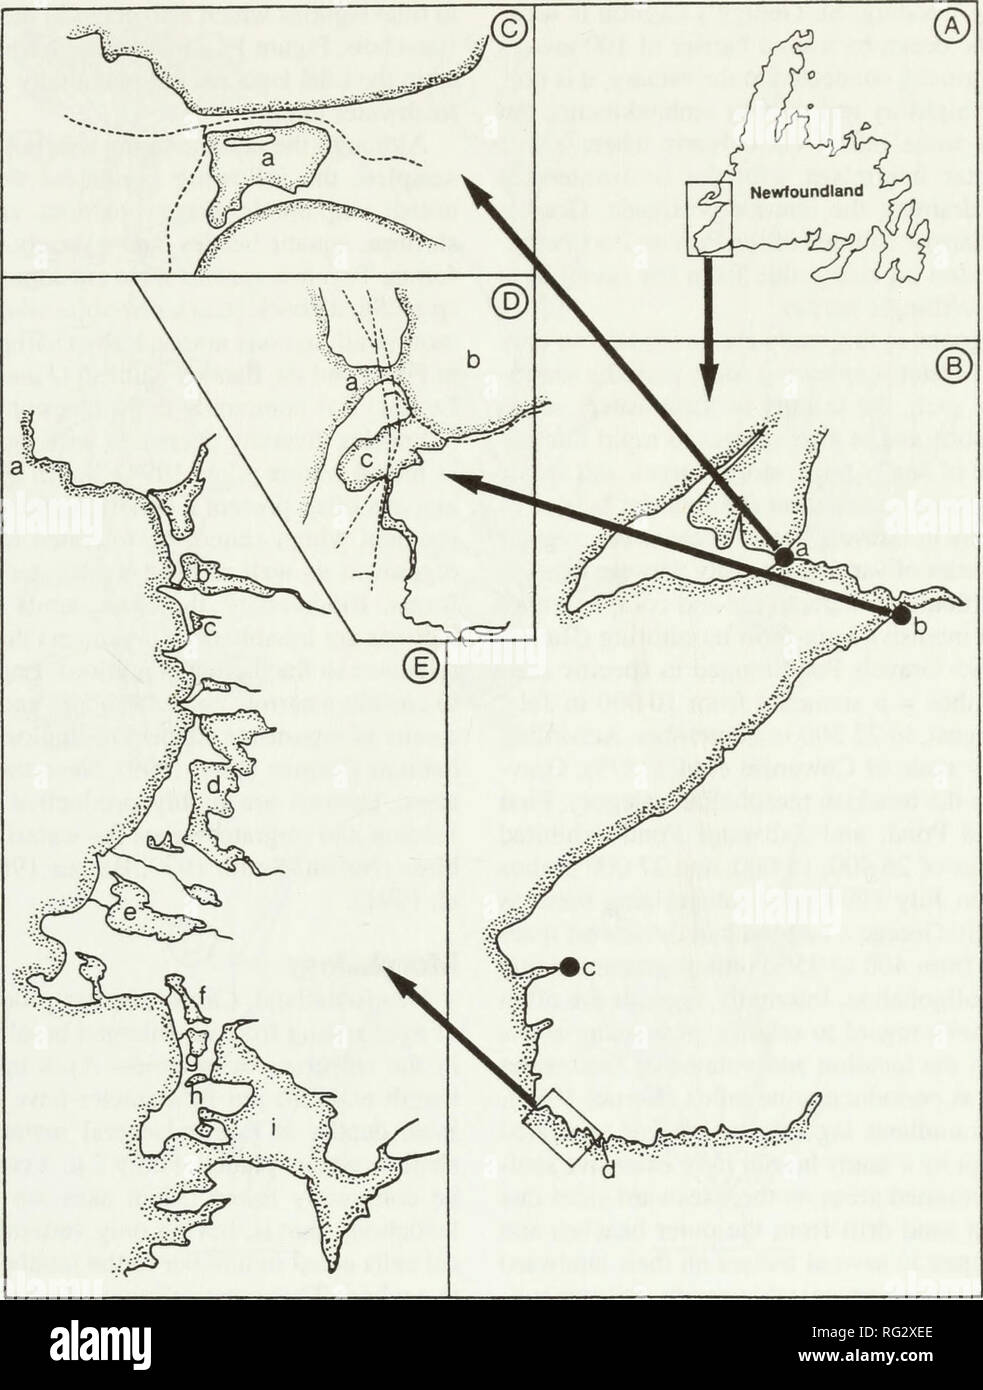 . The Canadian field-naturalist. Natural history; Sciences naturelles. 2005 Mann and Nambudiri: Charophytes of Insular Newfoundland II 27. Figure 1. Location of collection sites in Insular Newfoundland. A. Study area of southwestern Newfoundland inset. B. Coastal Newfoundland from Port aux Basques to the Port au Port Peninsula: (a) Gravels Pond, (b) St. George's Pond, (c) Codroy Estuary Pond, (d) Port aux Basques. C. Isthmus of the Port au Port Peninsula: (a) Gravels Pond. Dashed lines indicate roads. D. St. George's Bay: (a) Main Gut, (b) Estuary, (c) St. George's Pond. Dashed lines indicate  Stock Photo